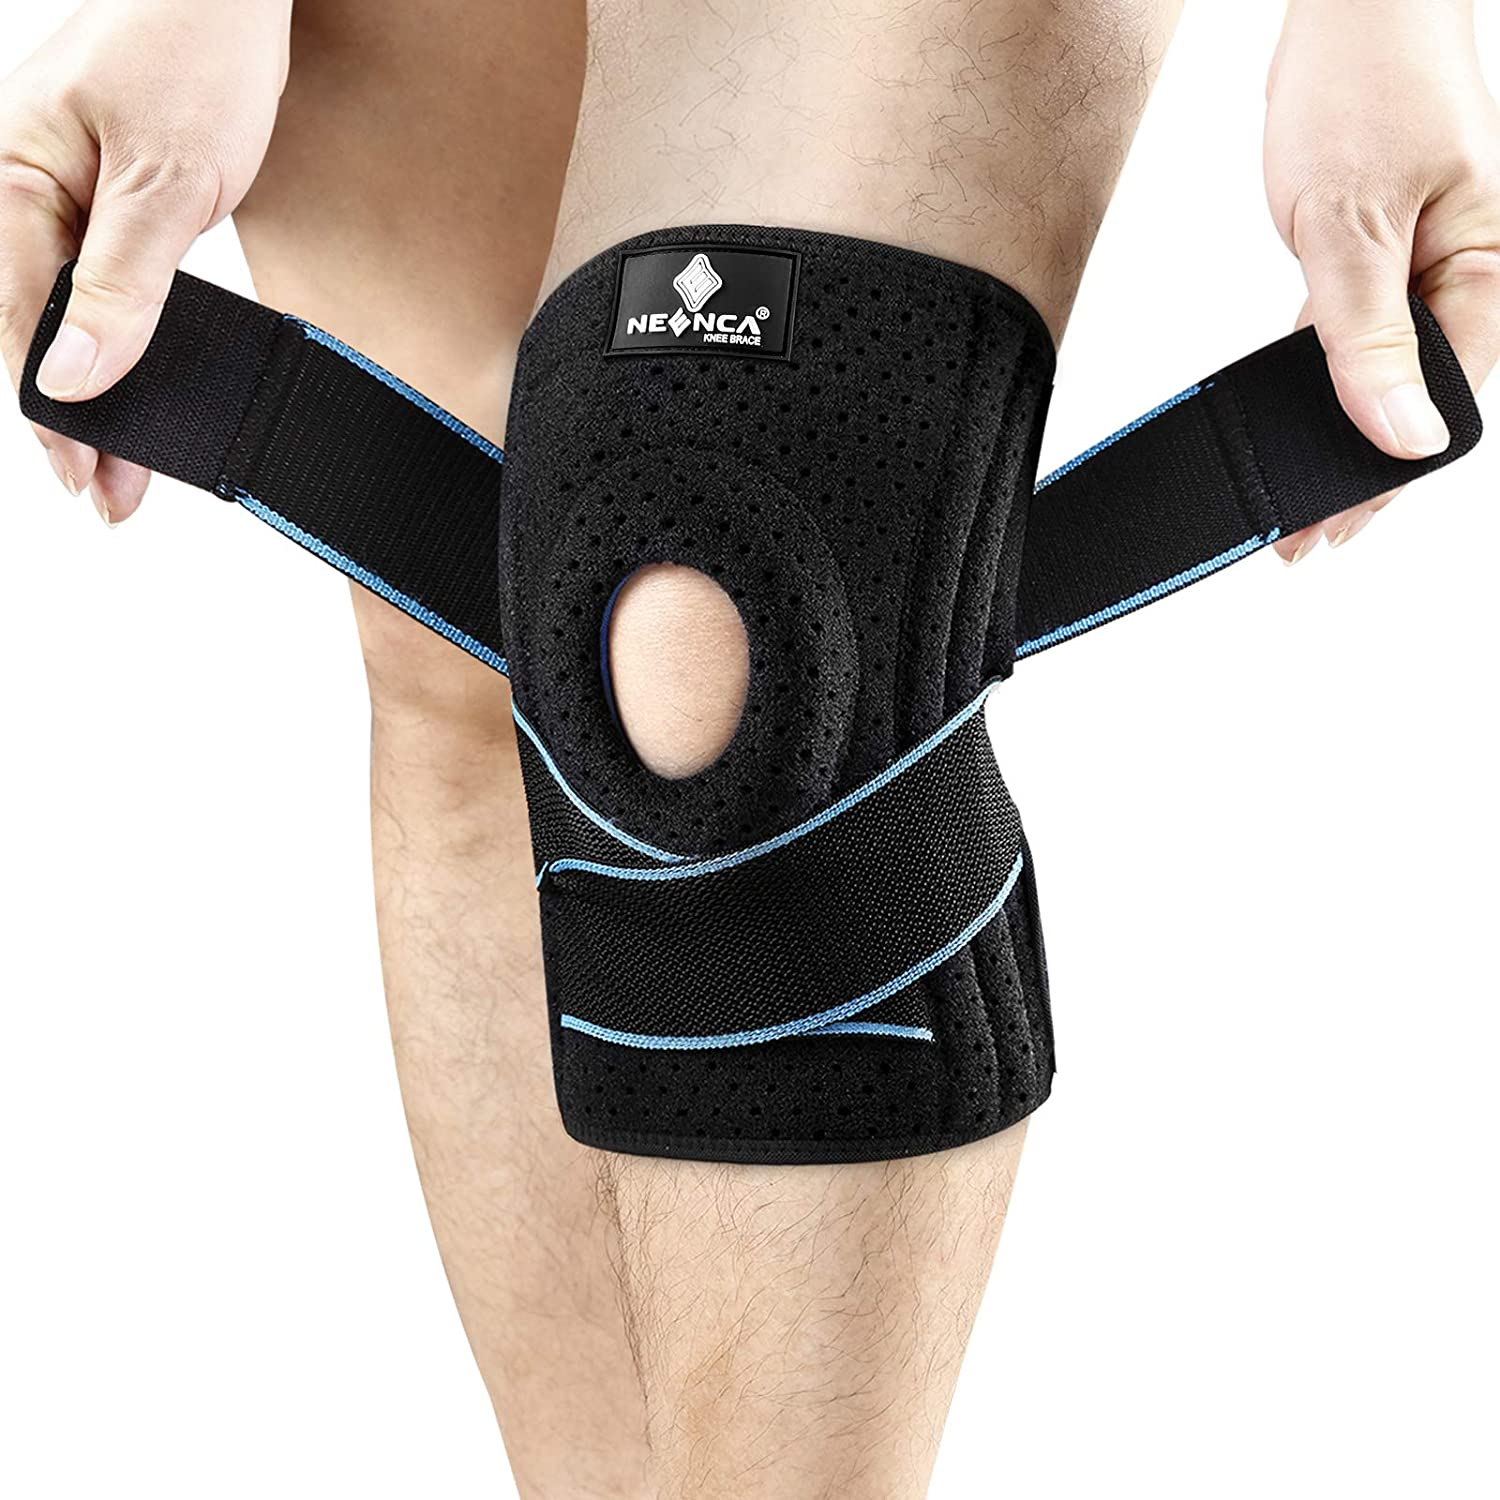 NEENCA Knee Brace with Side Stabilizers & Patella Gel Pads, Adjustable  Compression Knee Support Braces for Knee Pain, Meniscus Tear,Acl,Mcl, Arthritis, Joint Pain Relief,Injury Recovery-4 Sizes